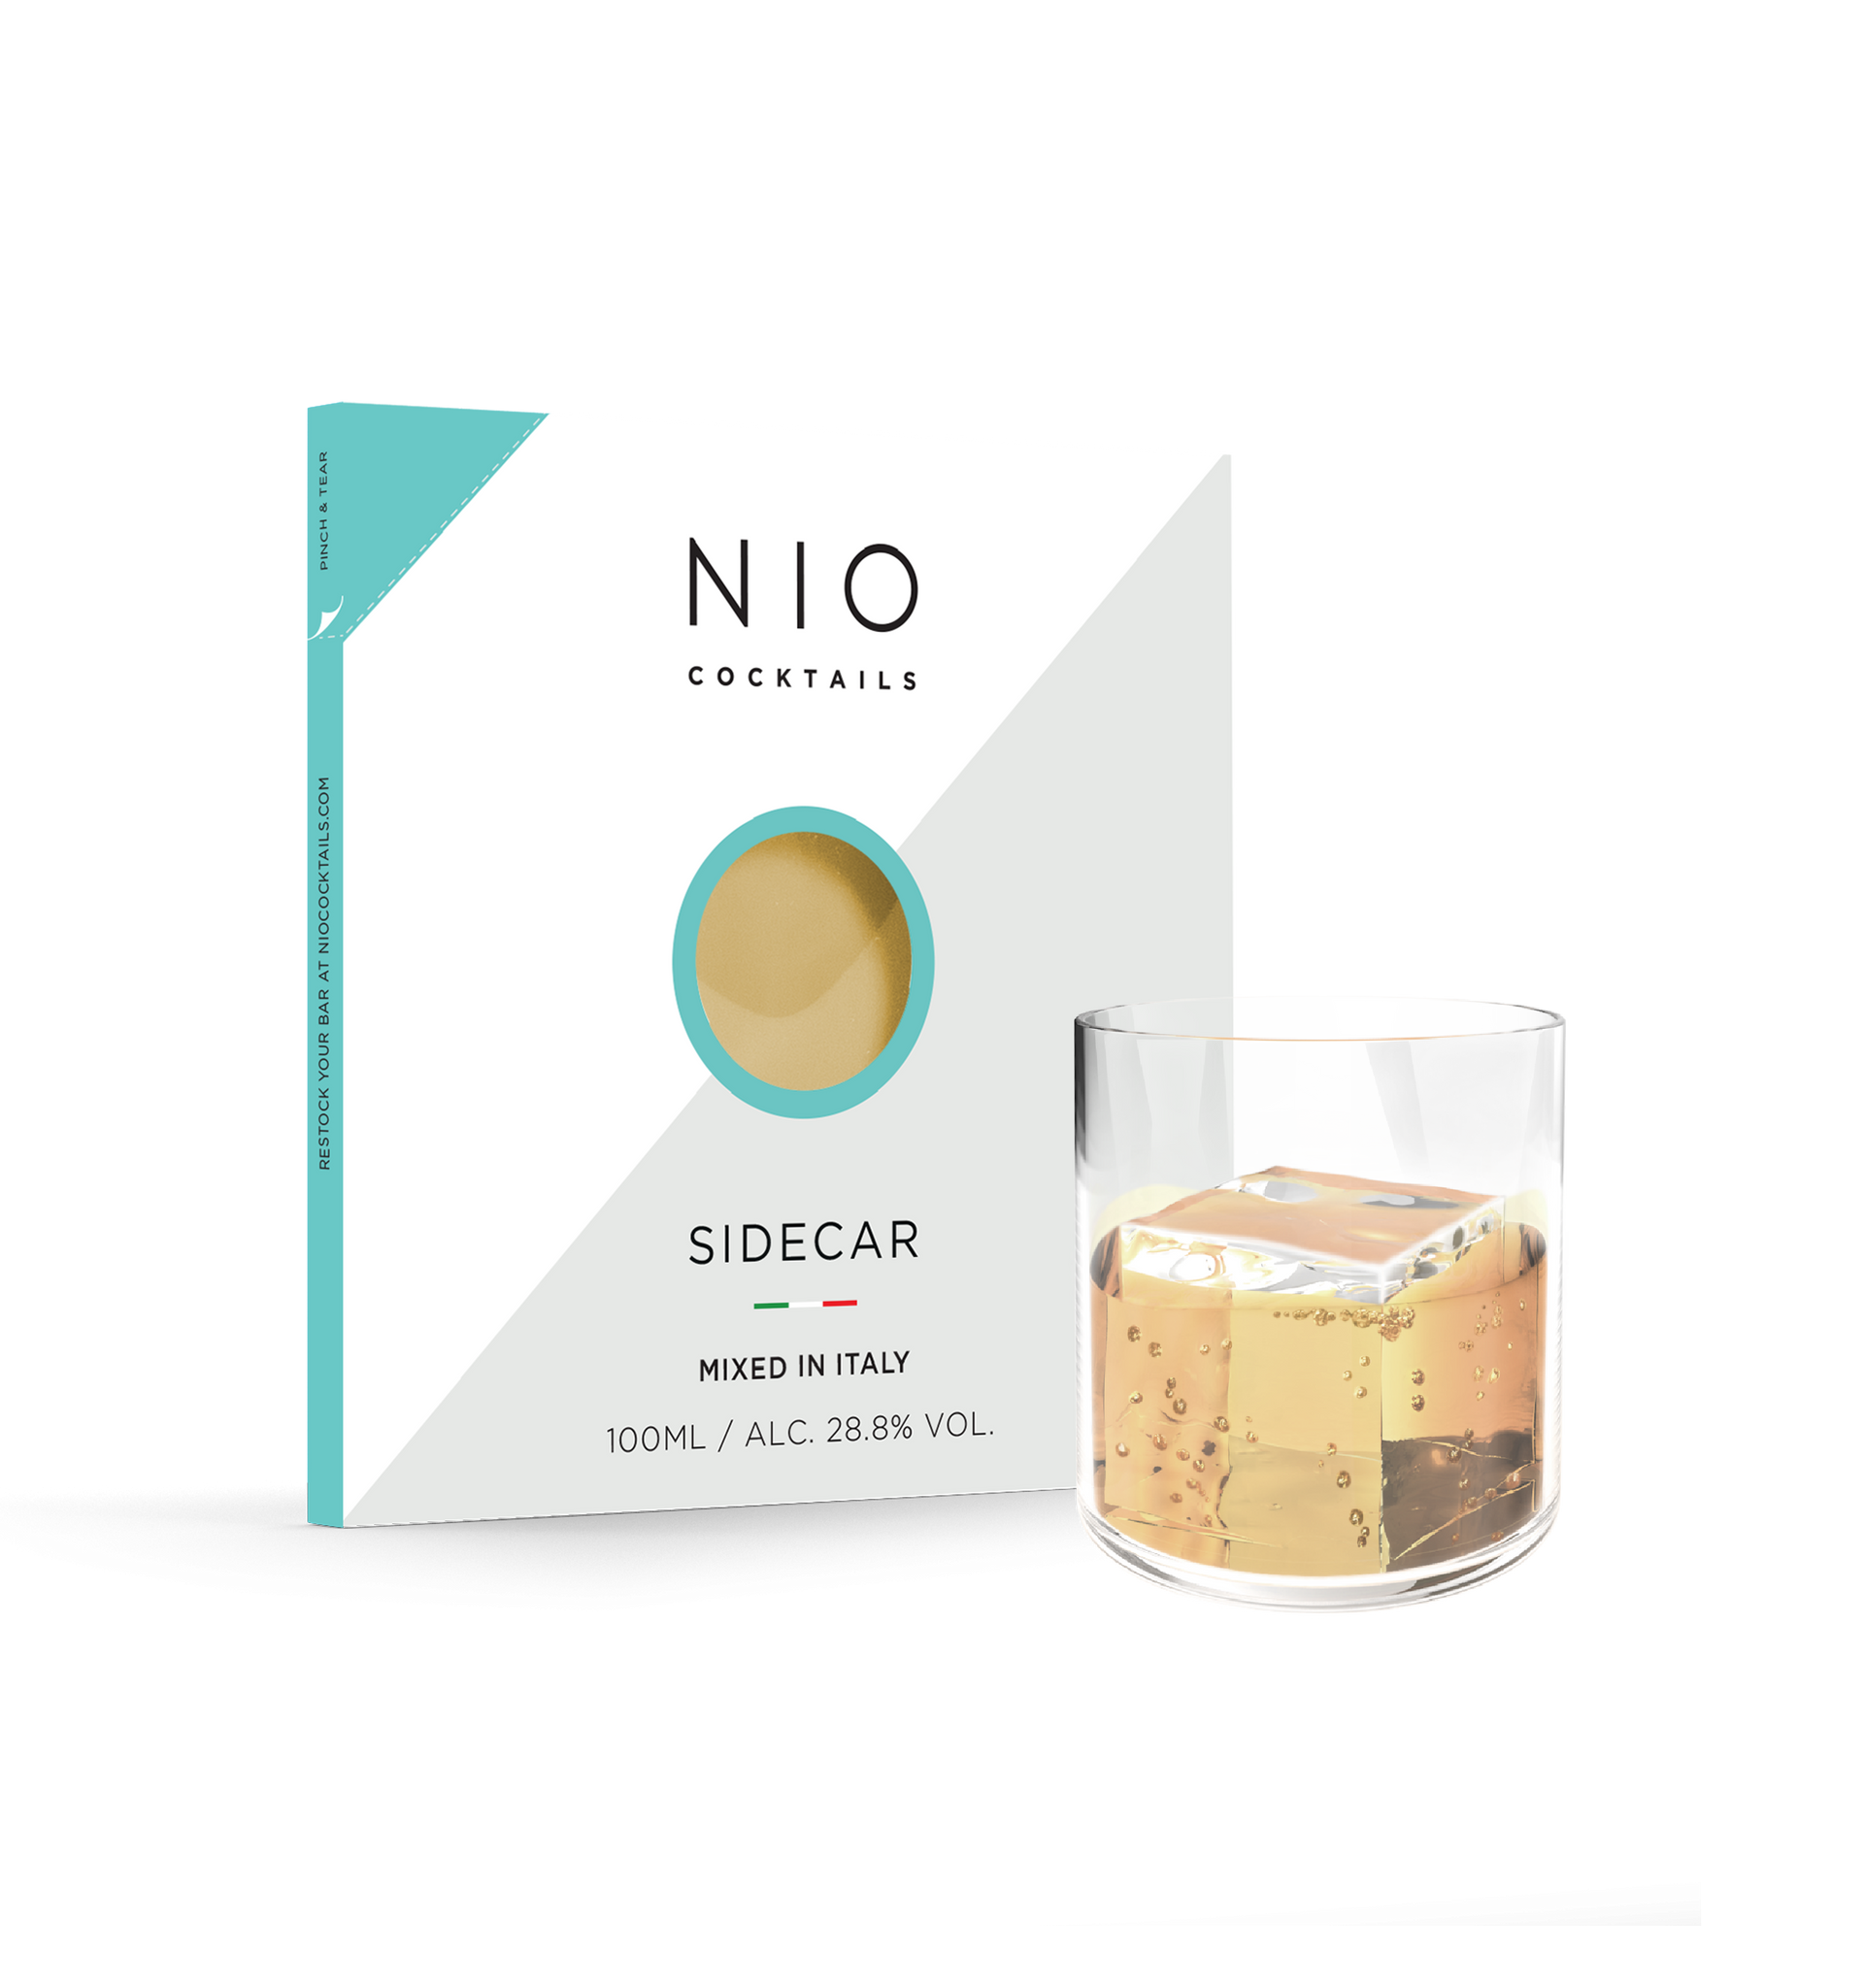 NIO Cocktails Sidecar ready to drink deliver wherever you want